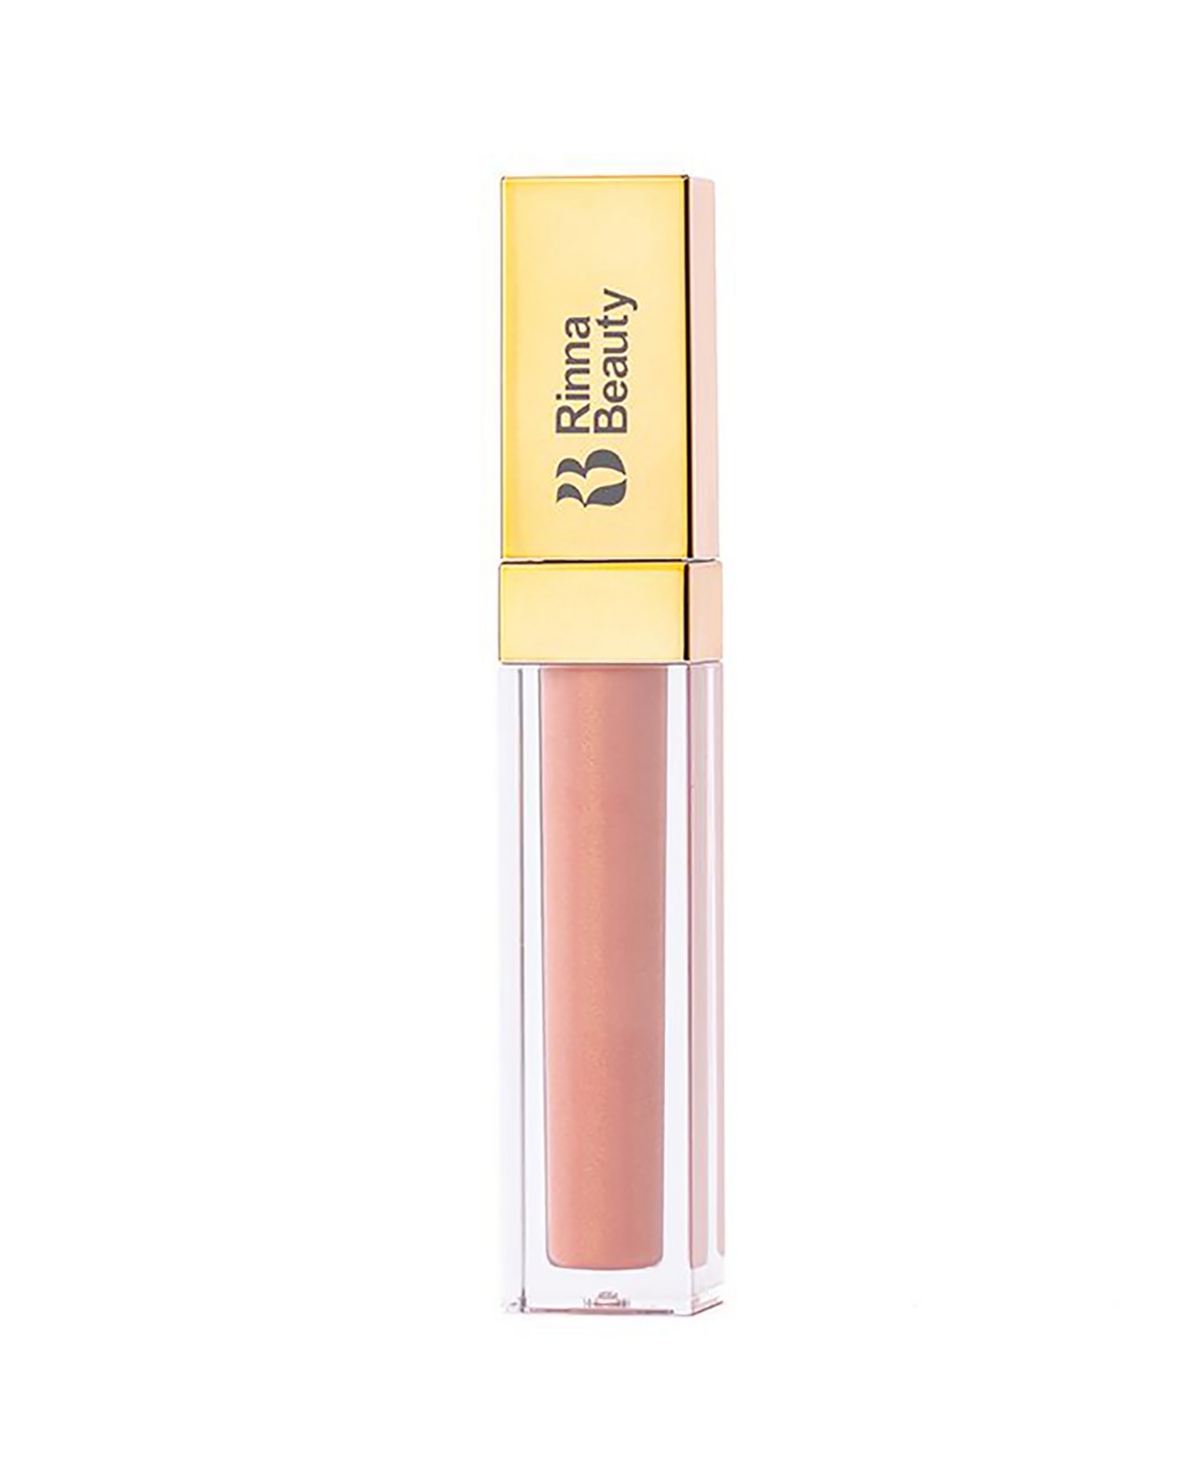 Larger Than Life All That Glitters Lip Plumping Gloss, 0.14 oz. - Creamy Dreamy (sheer silver)